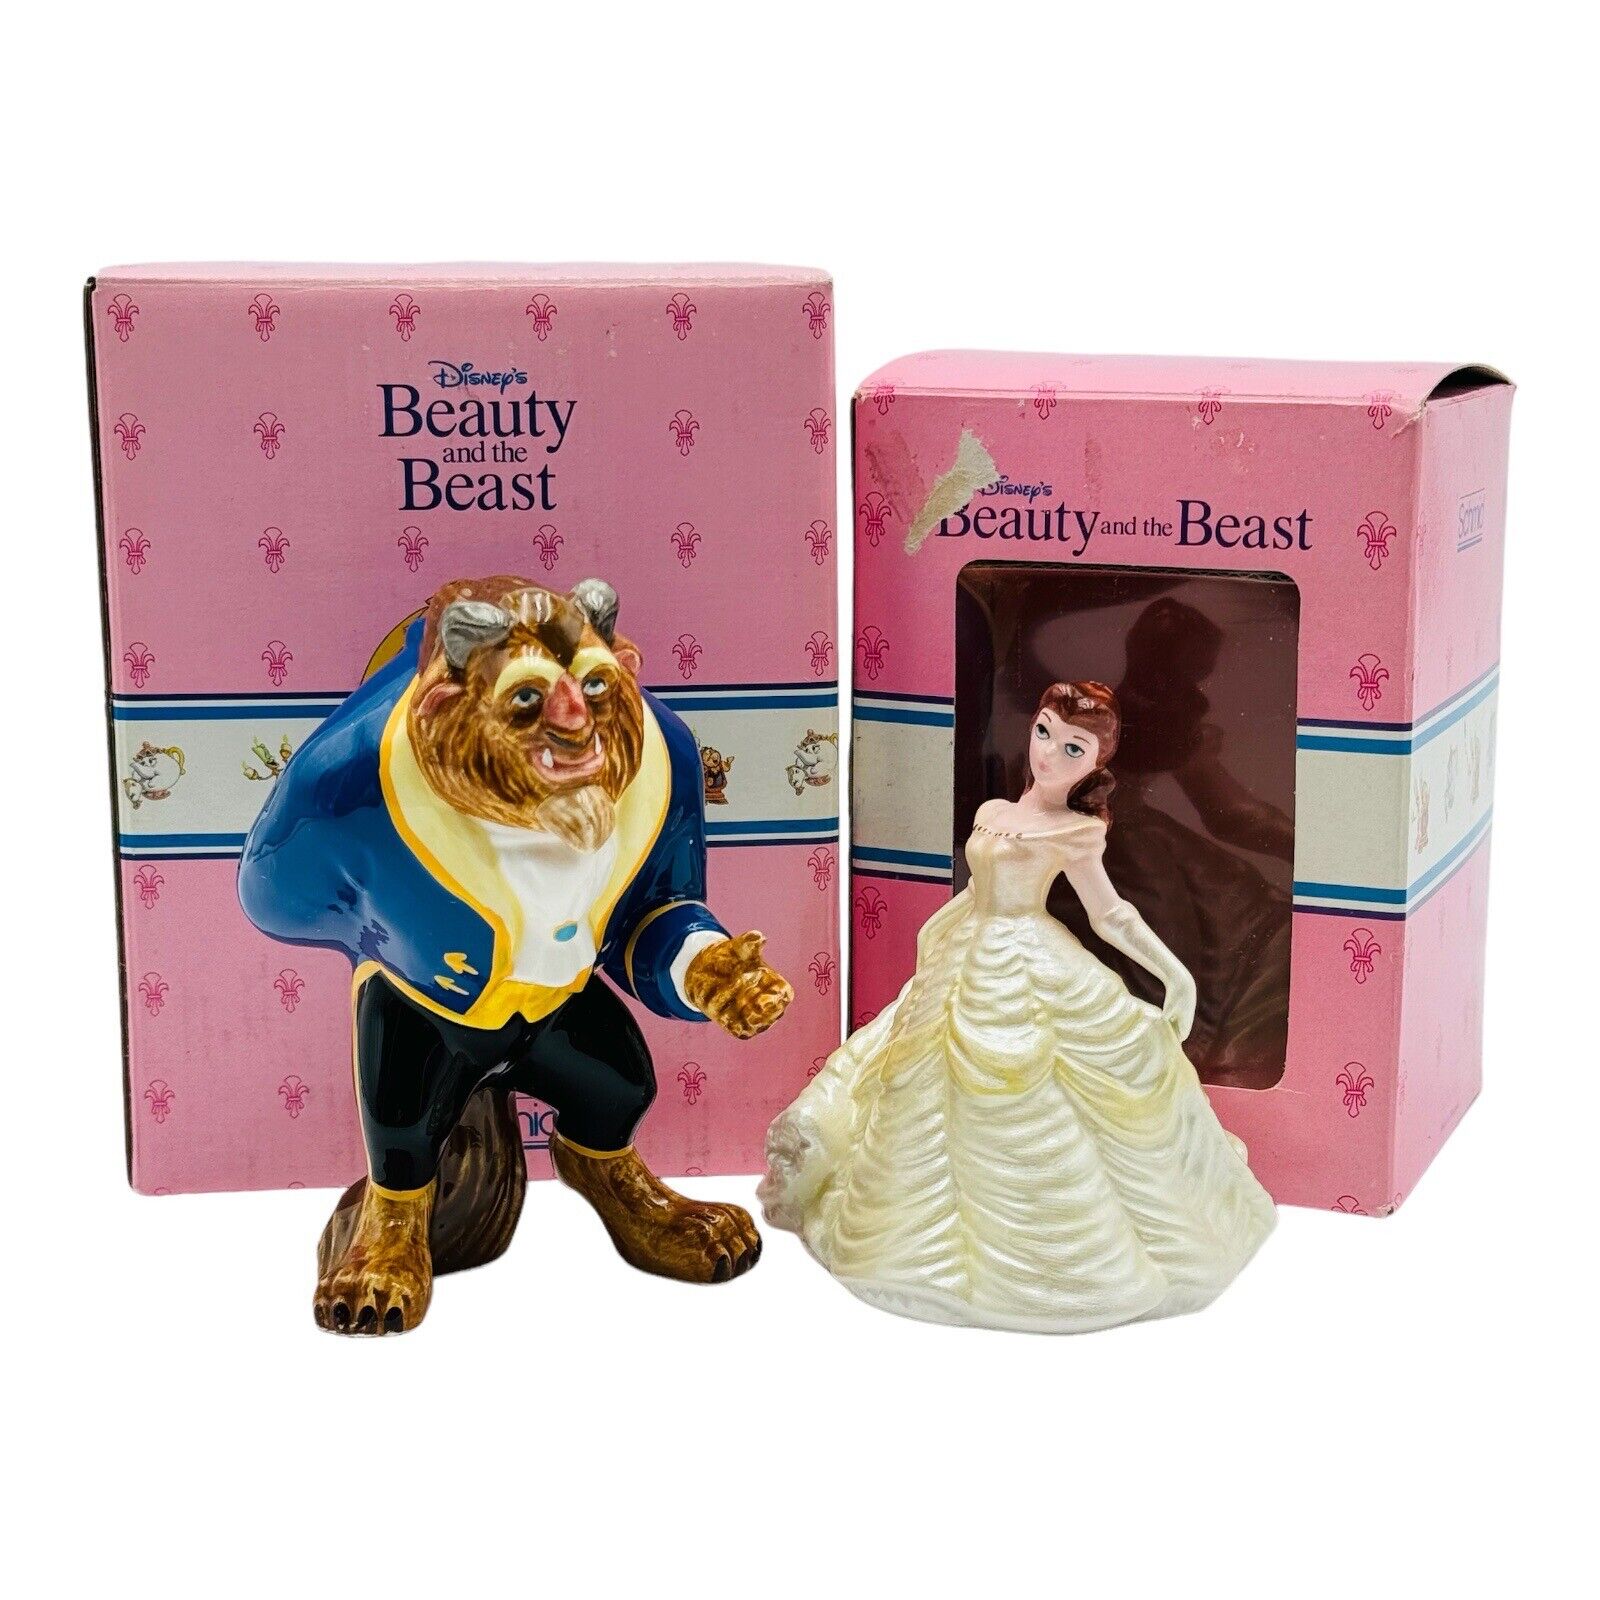 Schmid Disney’s Beauty And The Beast Figurines Set Of 2 NEW IN BOX